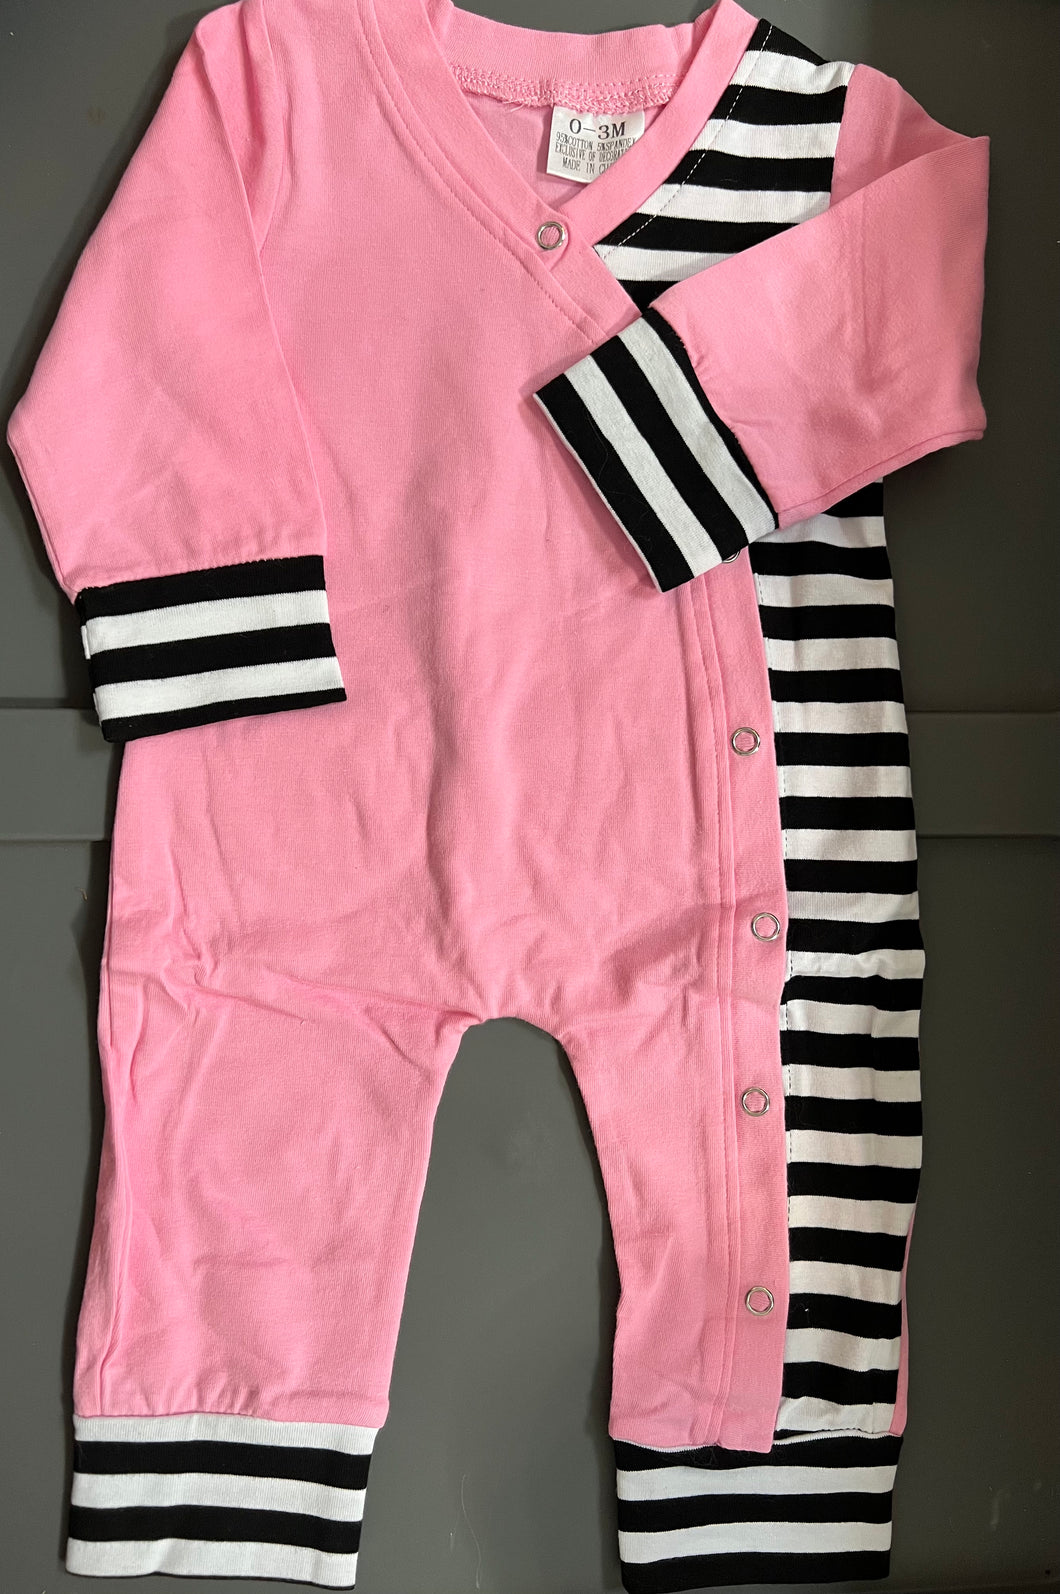 PINK WITH BLACK AND WHITE STRIPES ONESIE